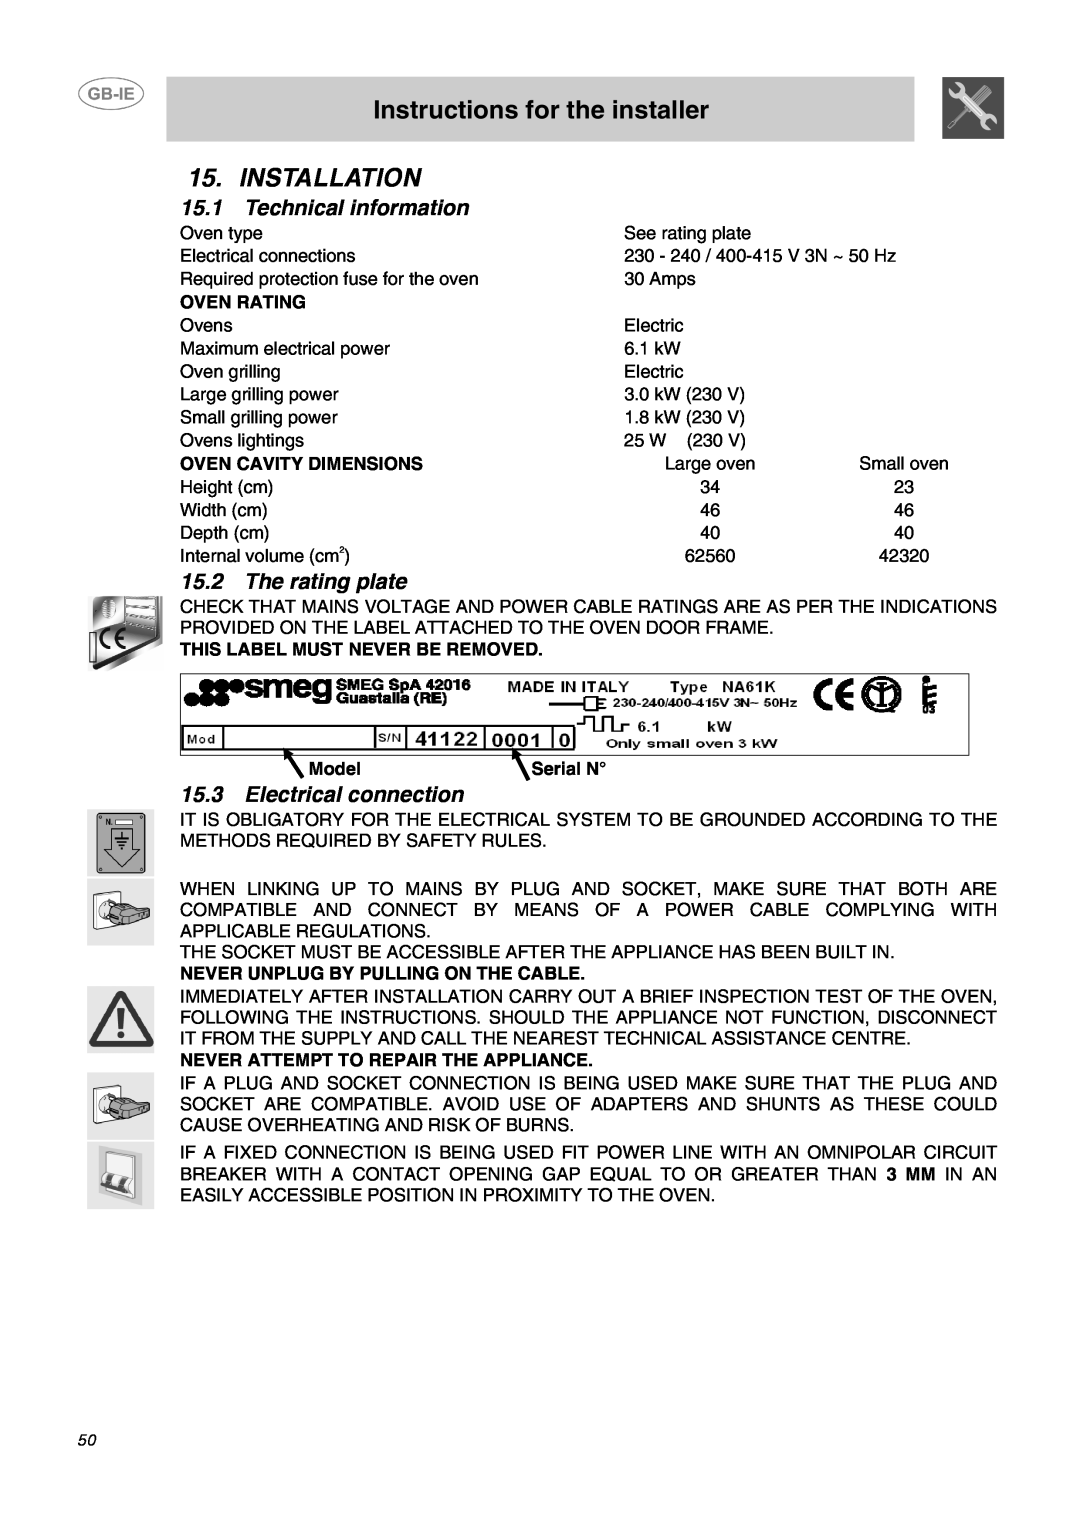 Smeg DO10PSS-5 Instructions for the installer, Installation, 15.1, Technical information, 15.2, The rating plate, Model 